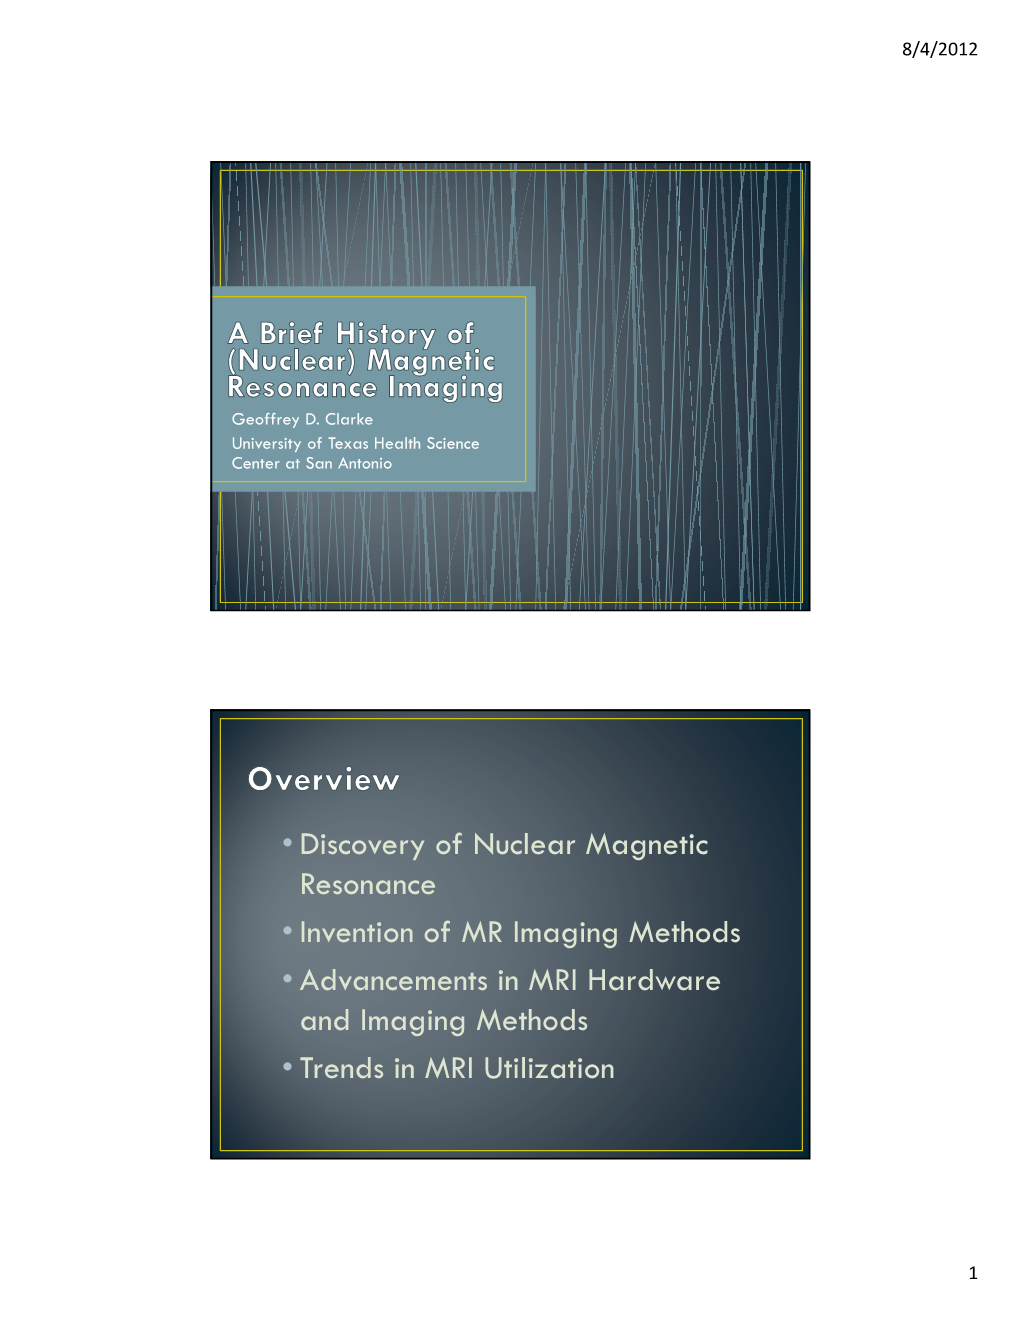 • Discovery of Nuclear Magnetic Resonance • Invention of MR Imaging Methods • Advancements in MRI Hardware and Imaging Methods • Trends in MRI Utilization